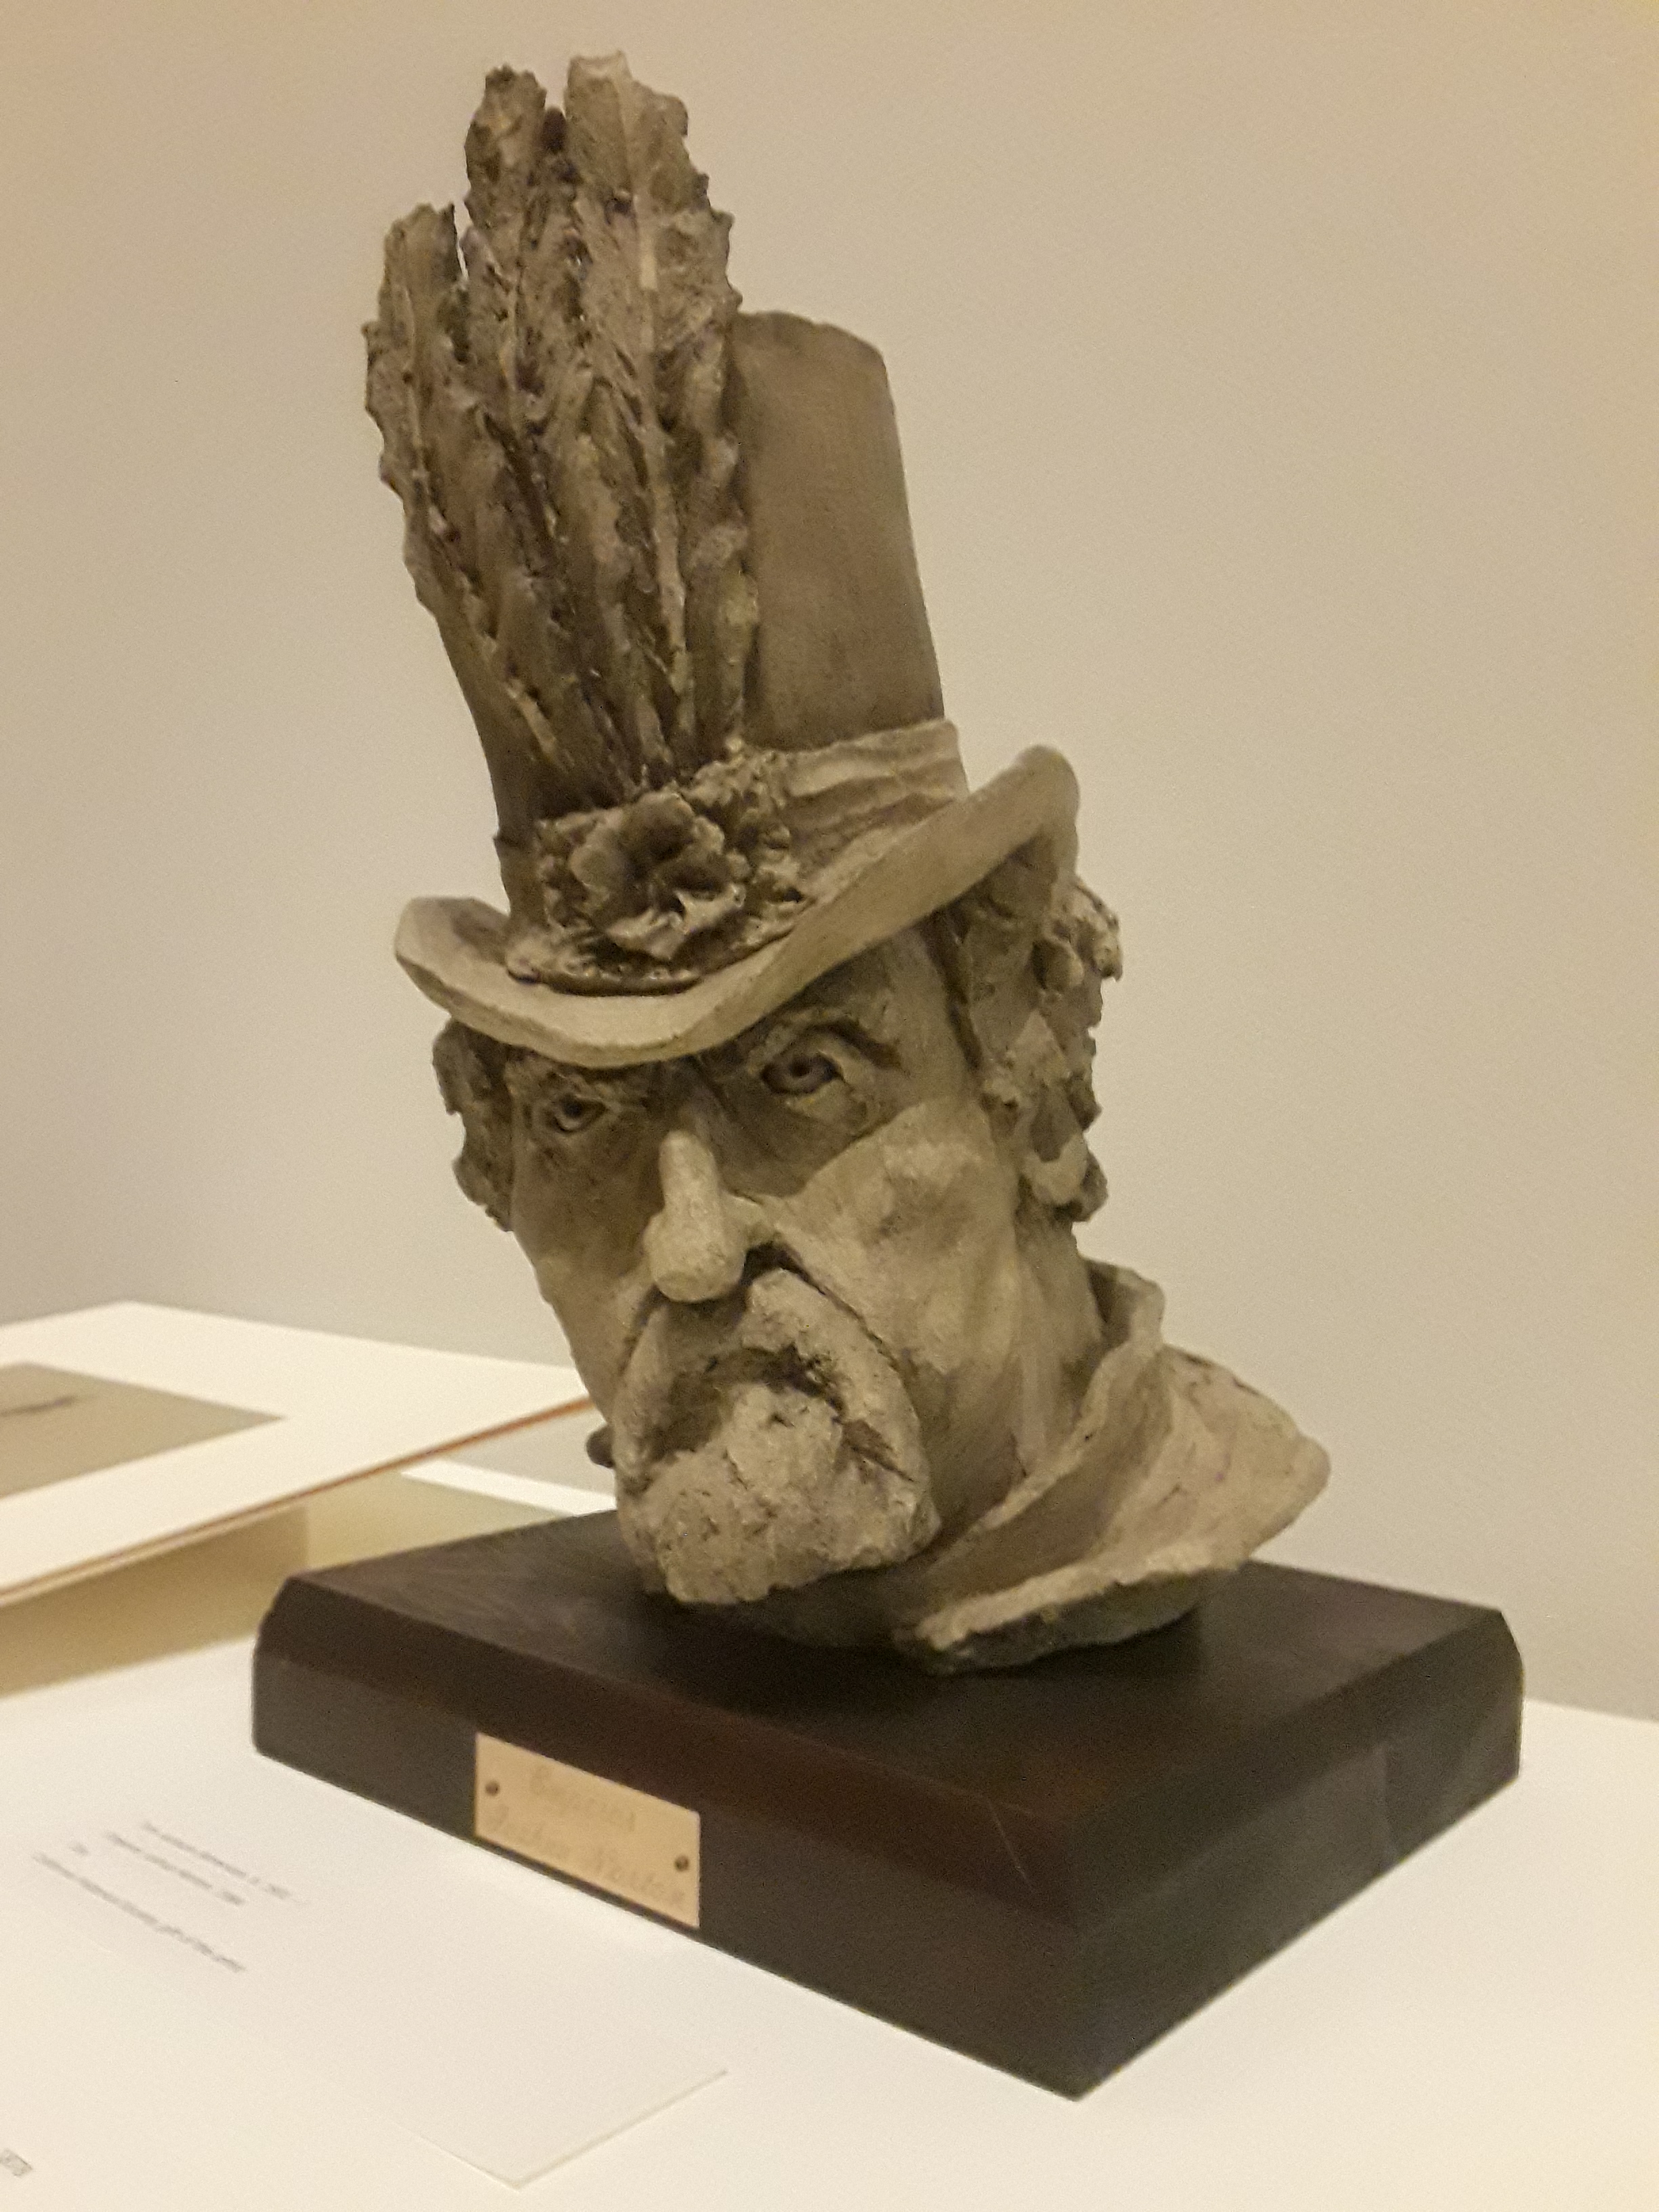   Emperor Joshua Norton (1984), clay, by Tom Jackson (b. 1931).  Collection of the California Historical Society; gift of the artist. [Added 2.19.2018] 